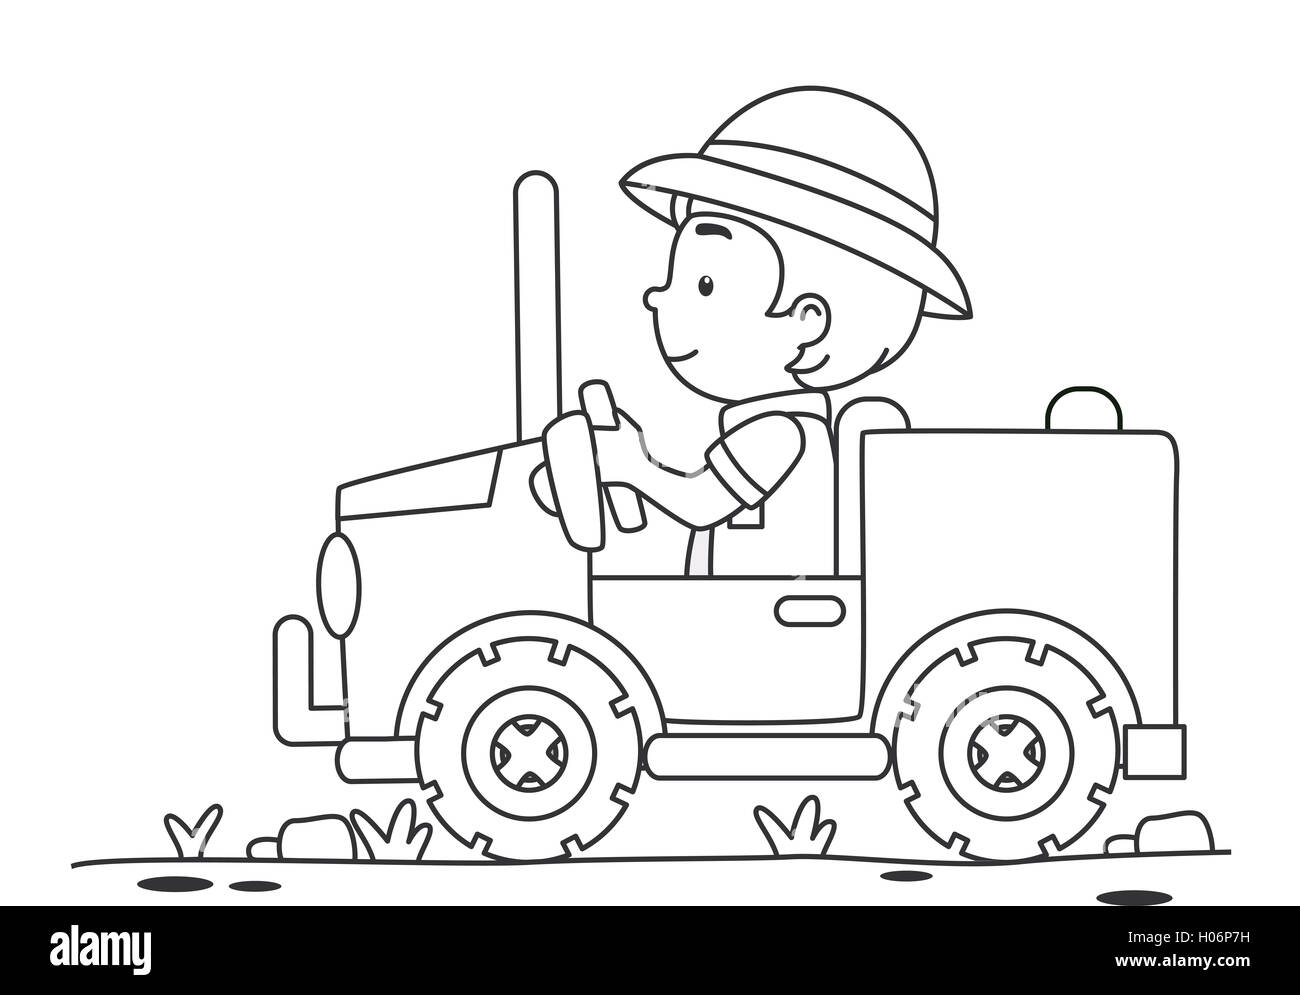 Black And White Coloring Page Illustration Of A Boy Stock Photo Alamy